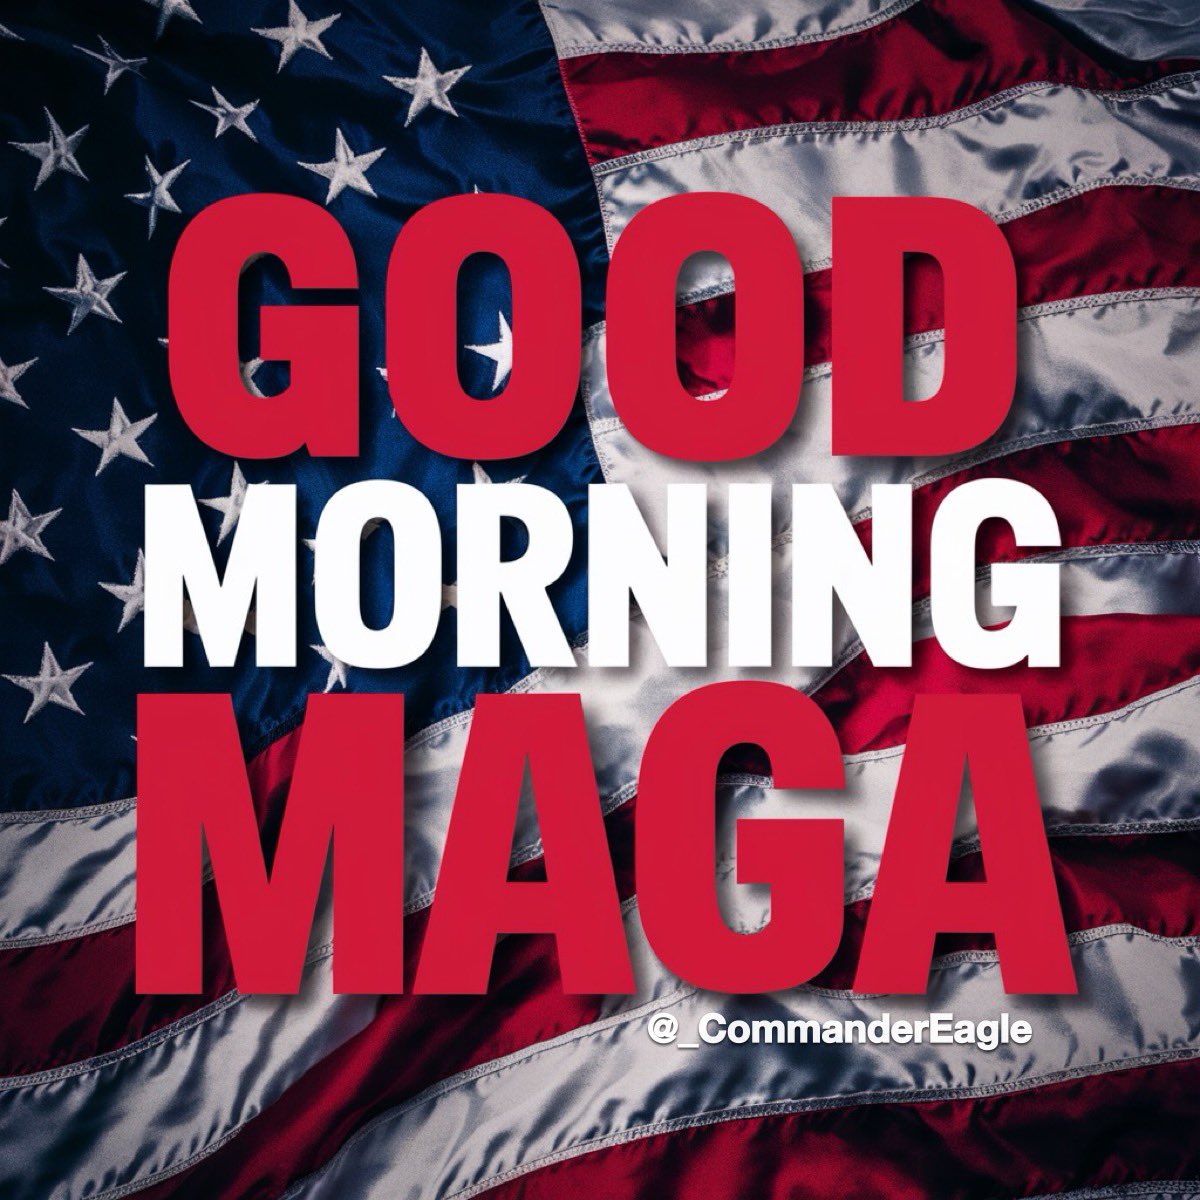 Good morning and happy Sunday to everyone voting Trump in 169 days! FJB! 🇺🇸 ☕️